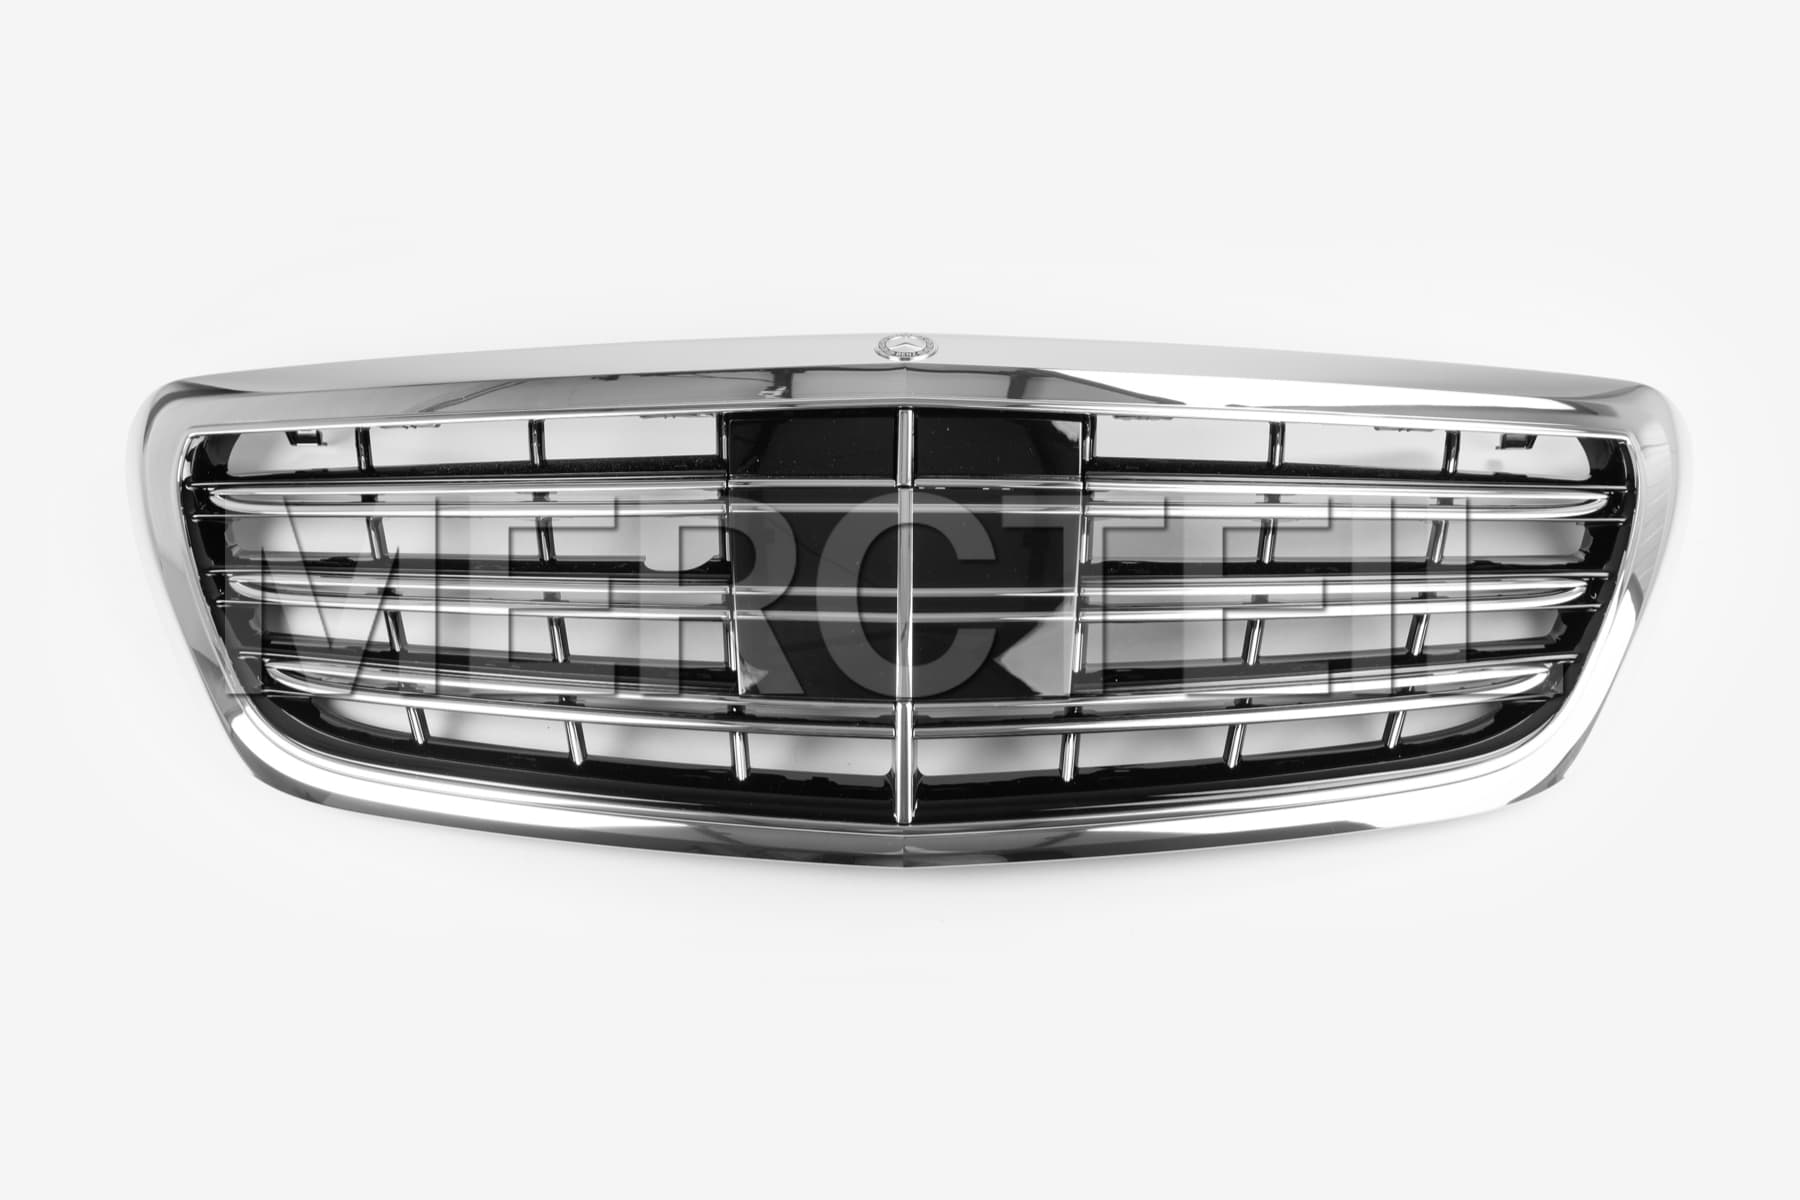 Silver Mercedes Benz S Class W222 Maybach Front Grill, For Car at